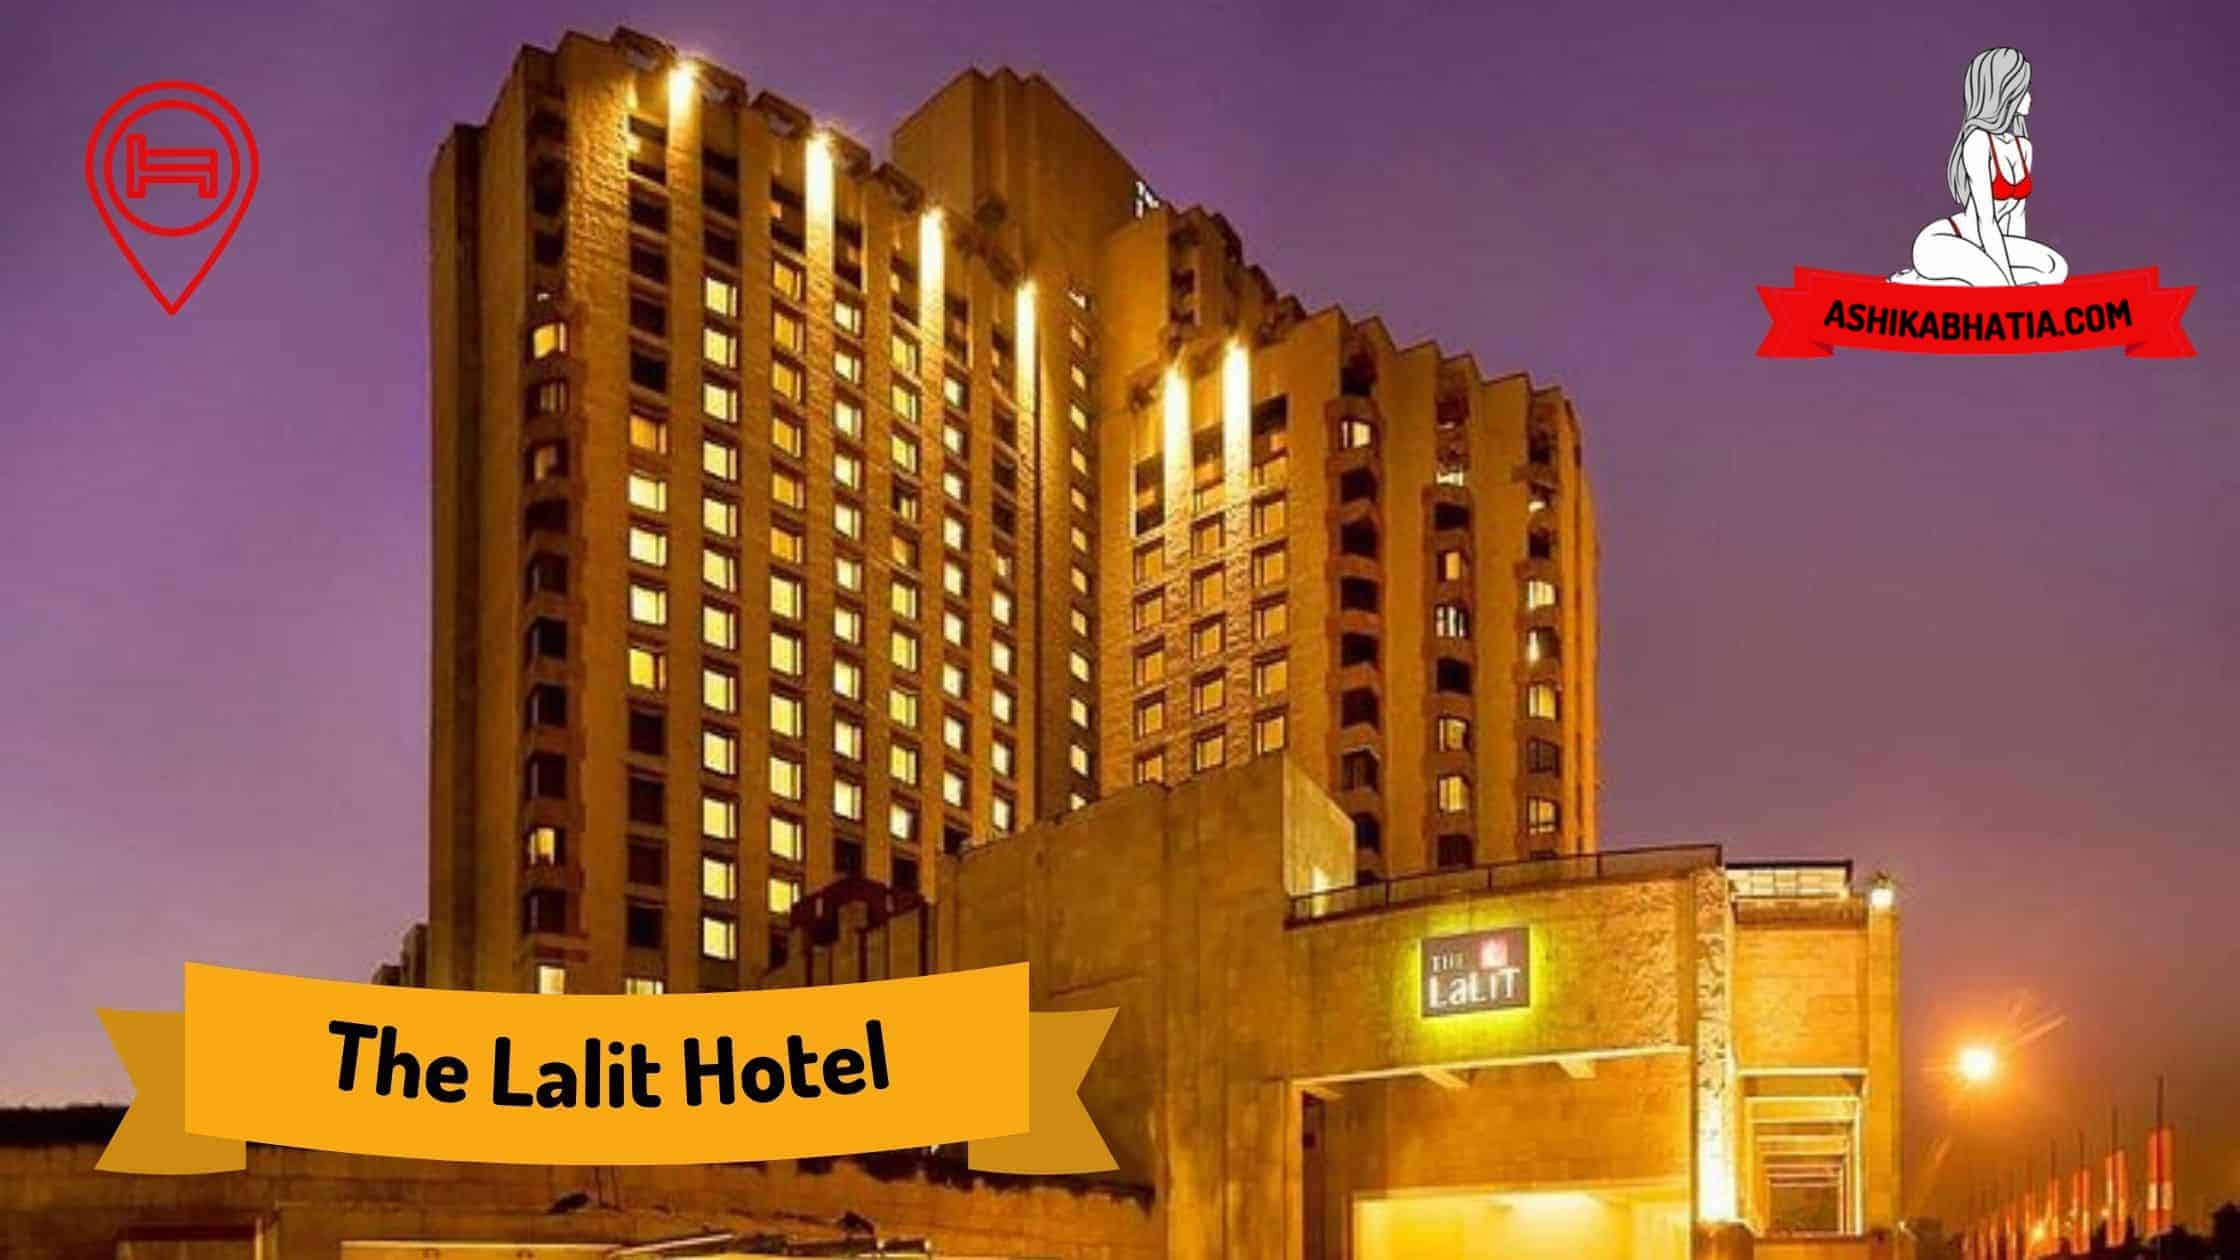 Escorts Services In The Lalit Hotel